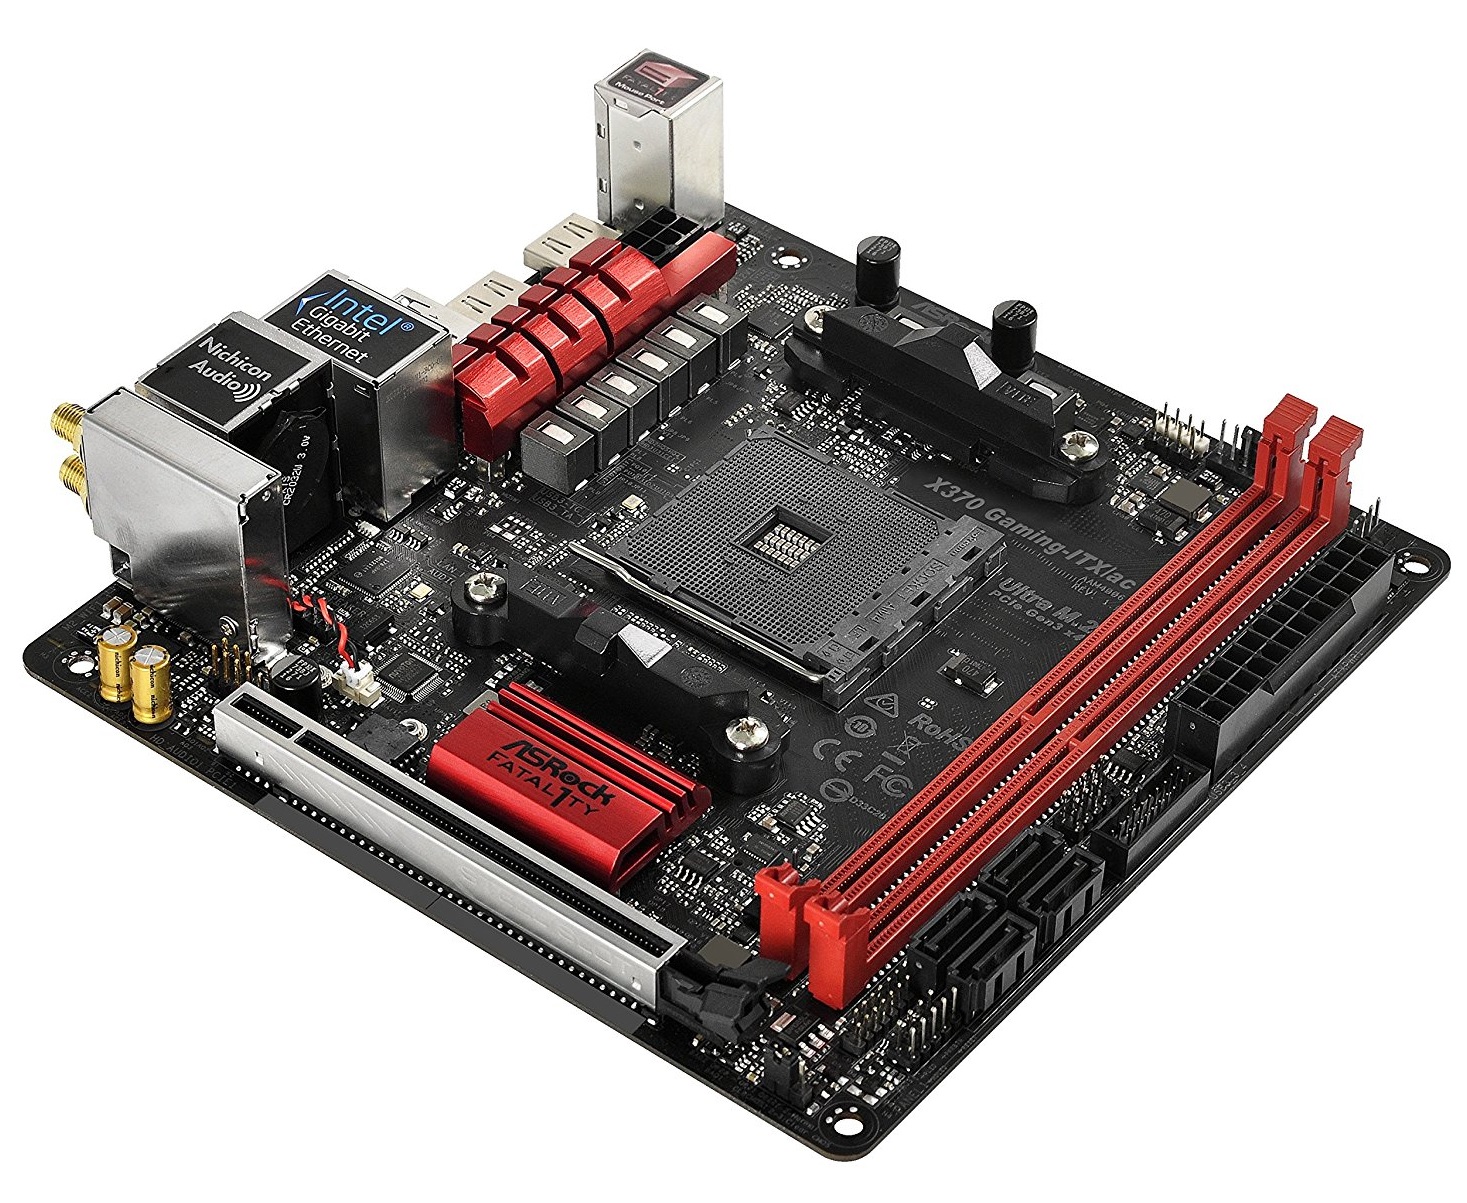 The ASRock X370 Gaming-ITX/ac Motherboard Review